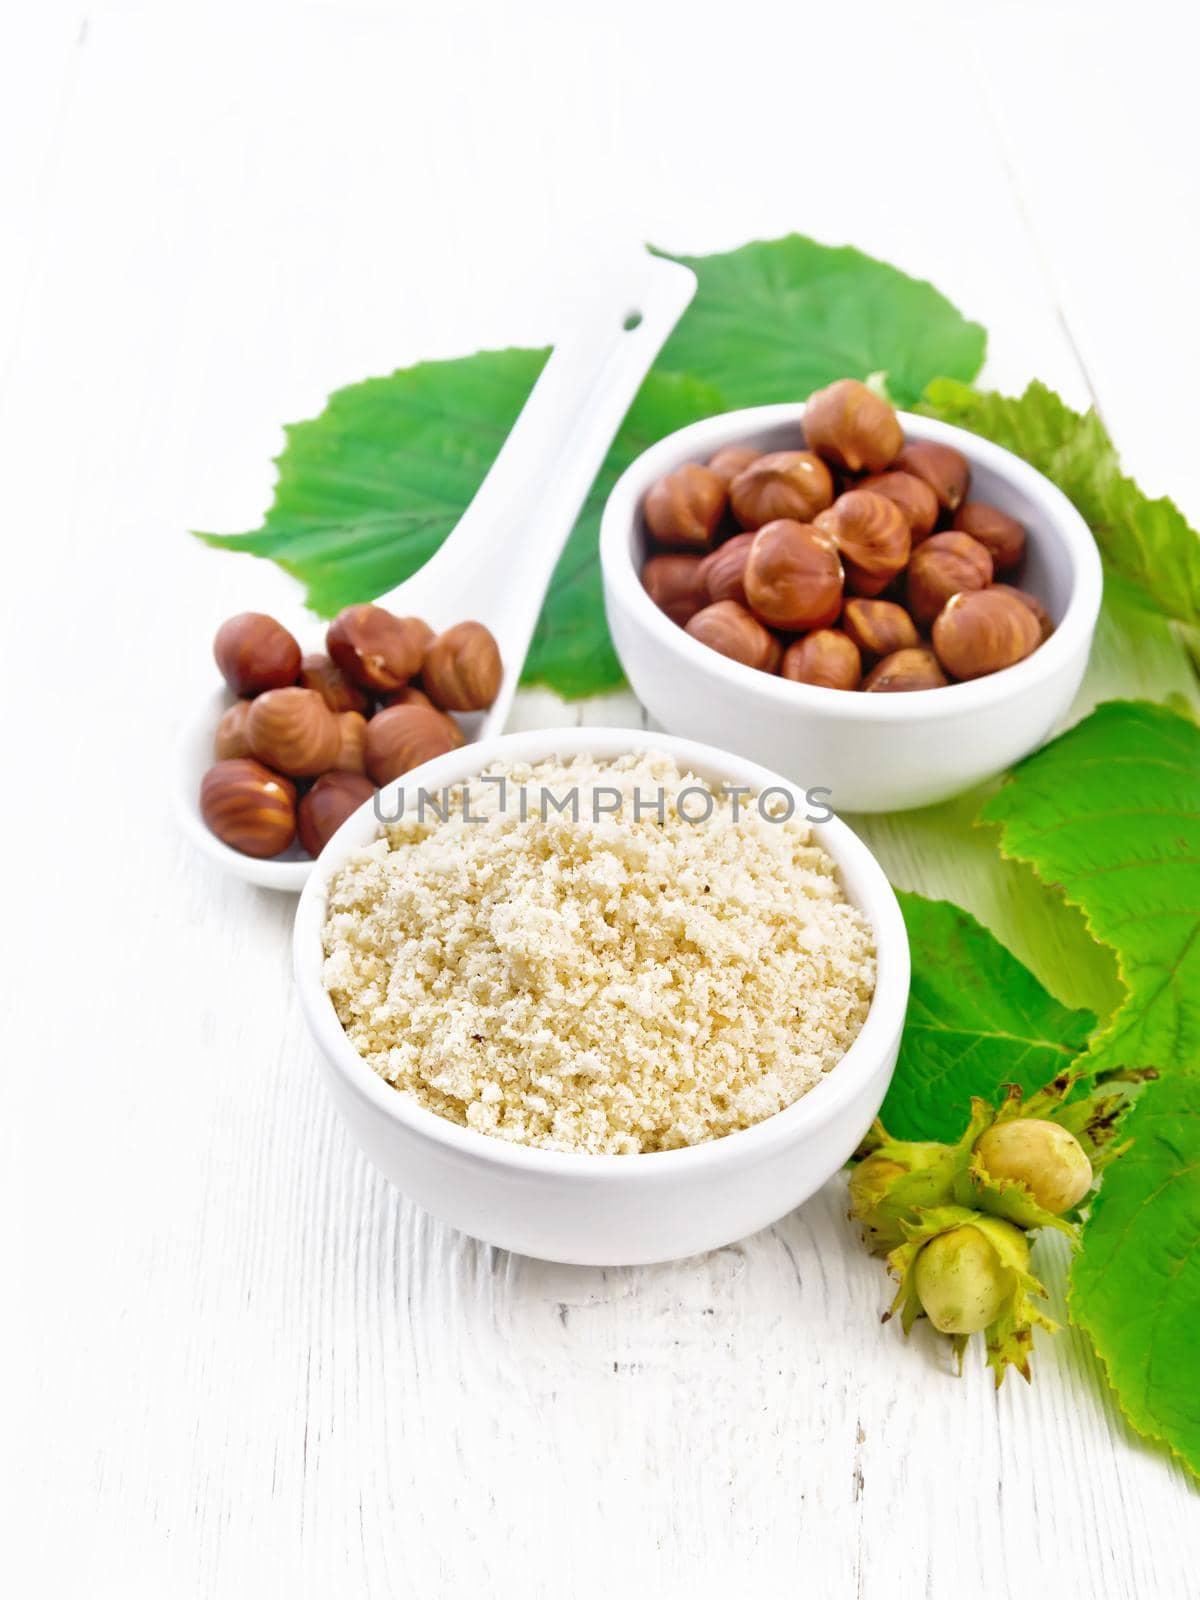 Flour and hazelnuts in two bowls, a spoon with peeled walnut kernels and a branch of filbert with leaves on wooden board background